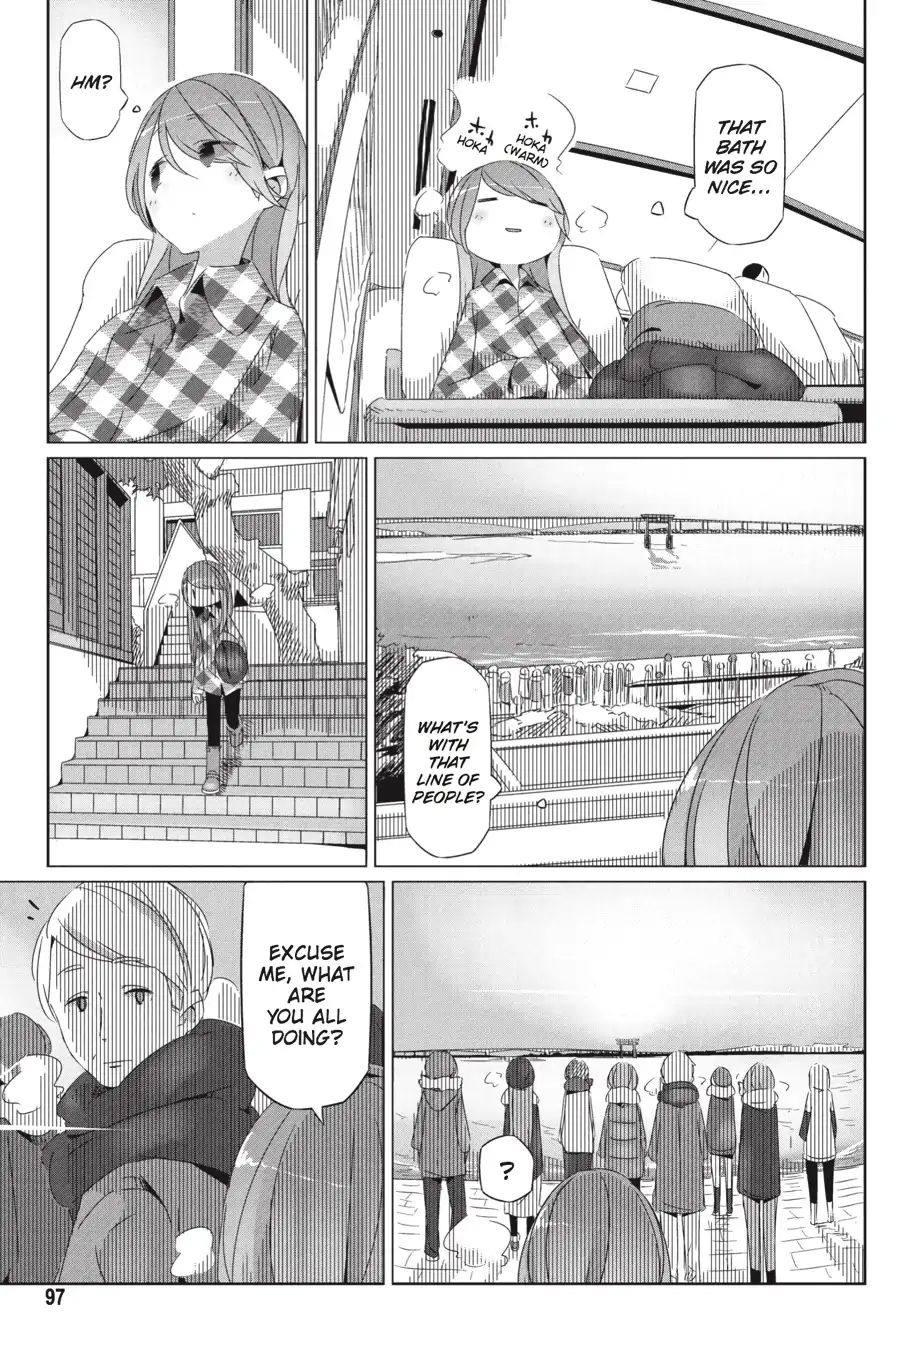 Yurucamp Vol.5 Chapter 27: The Ocean, the Lake, and Some Lucky Camping